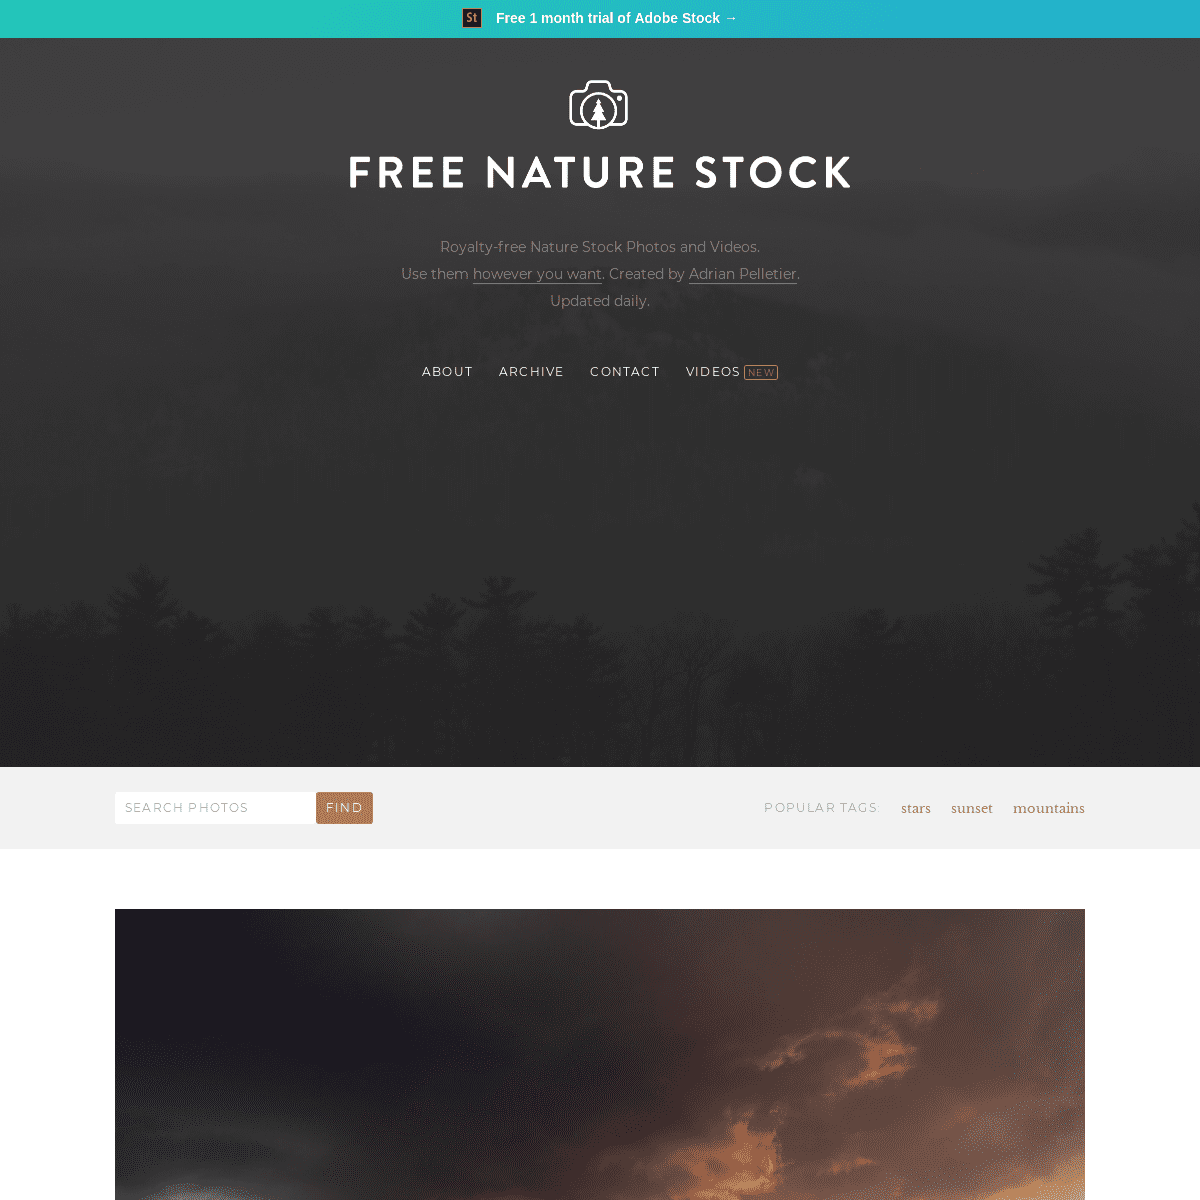 Free Nature Stock · Royalty-free stock photos by Adrian Pelletier · Updated daily